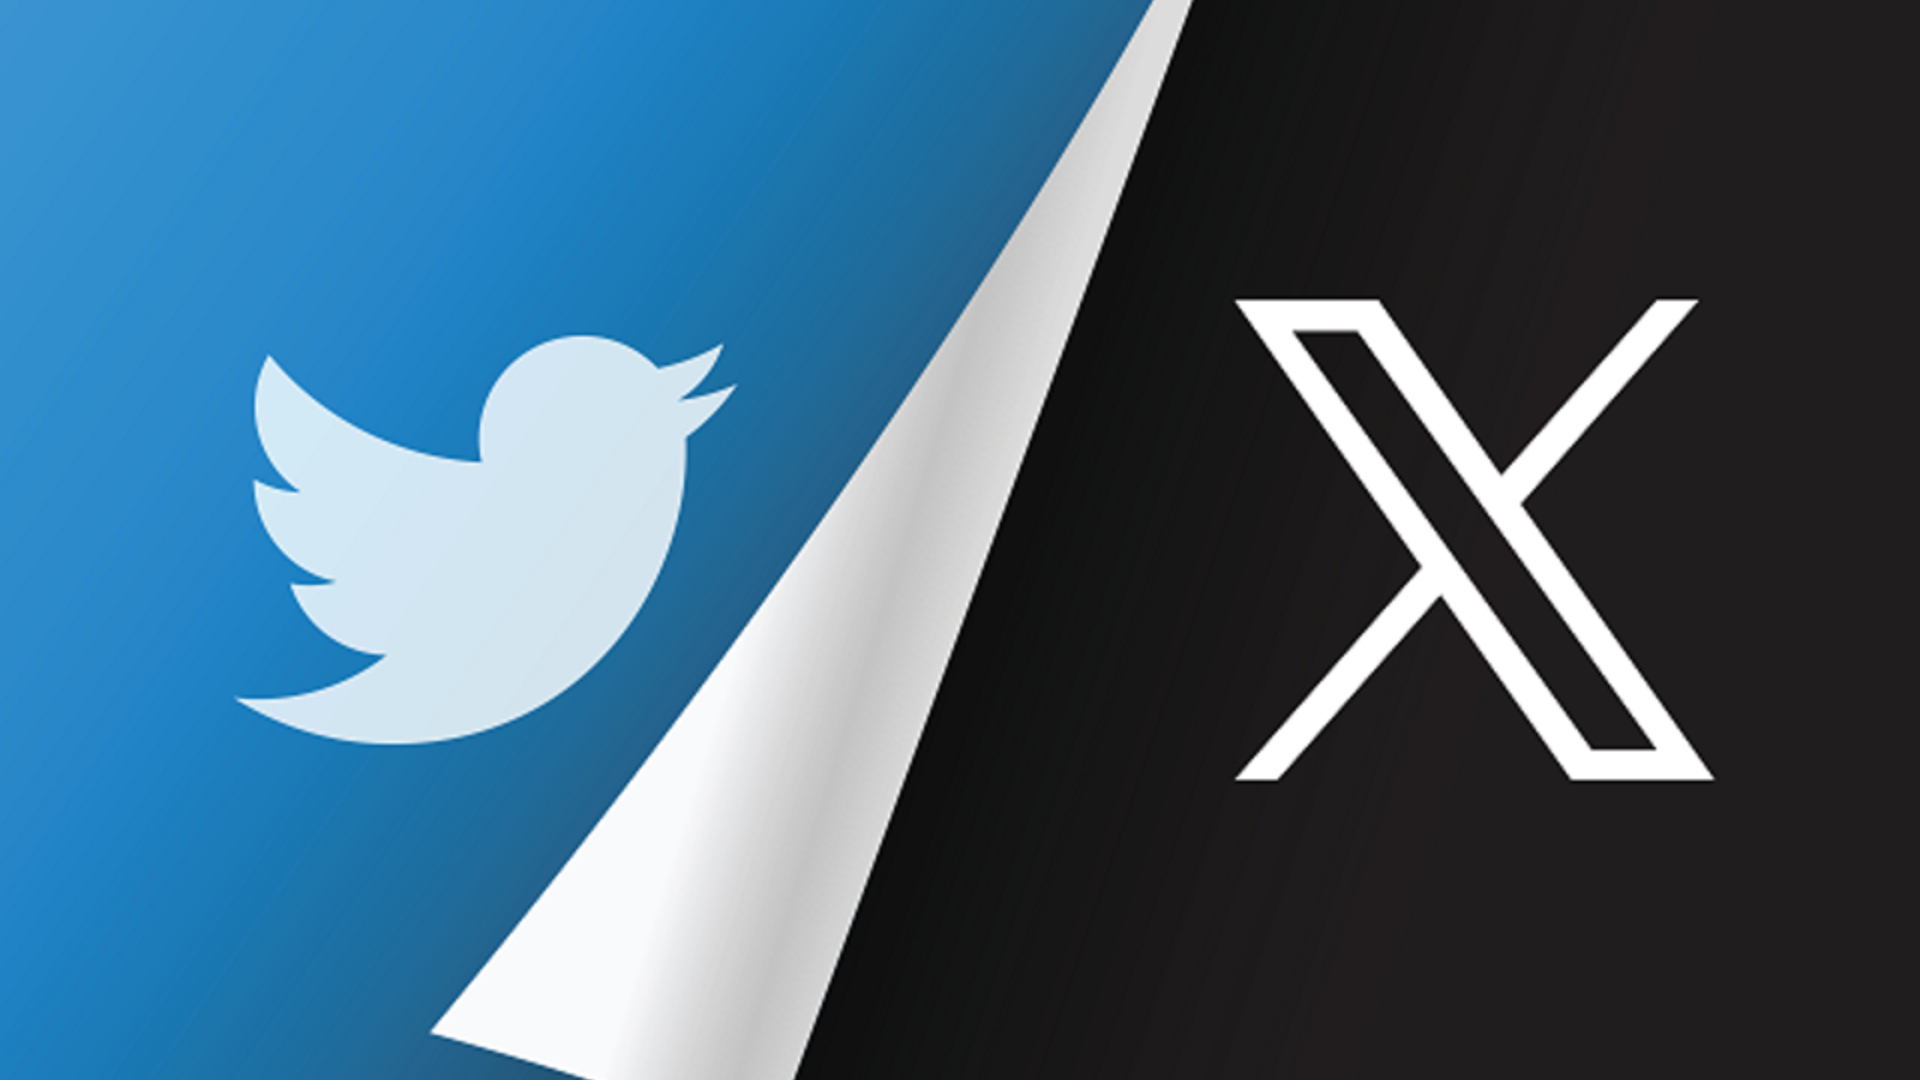 Platform X, Formerly Known As Twitter, Experiences Outage; Numerous Users Face Access Issues